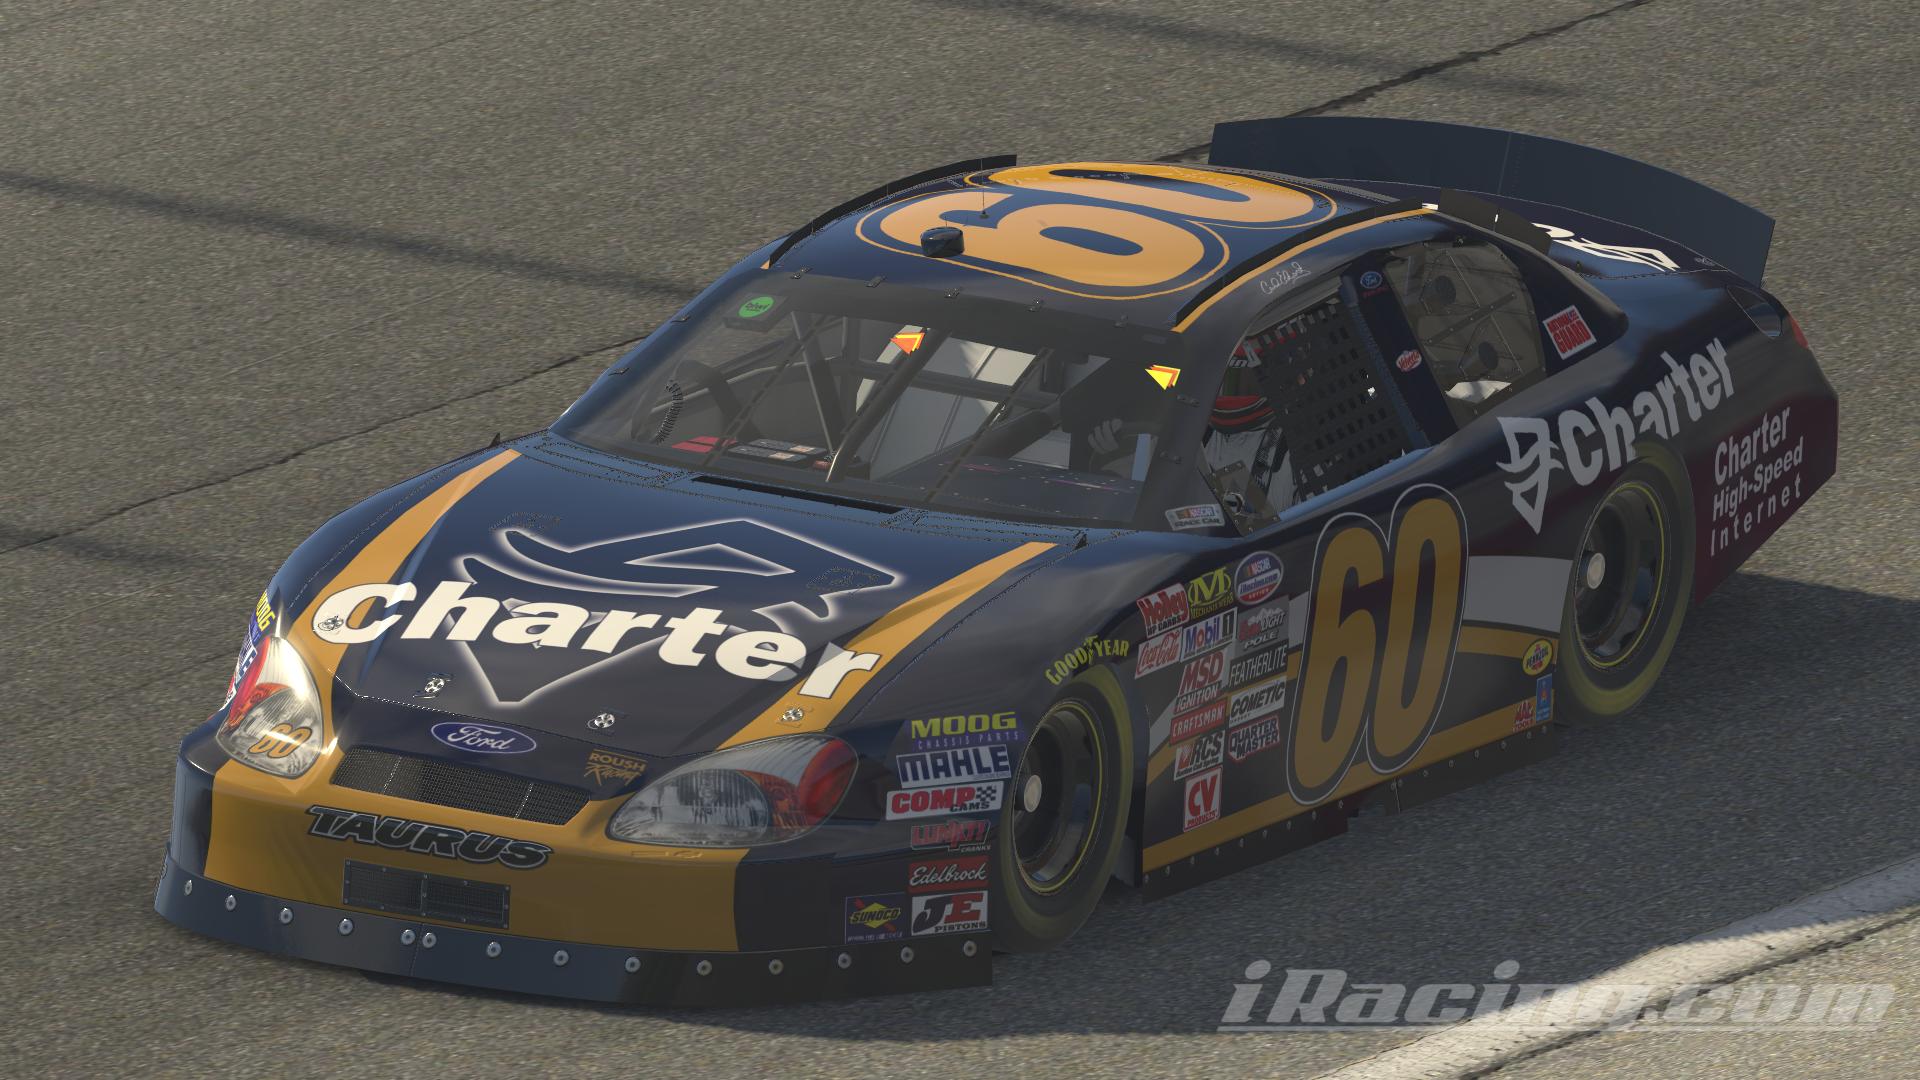 Preview of Carl Edwards 2005 Charter Ford Taurus No Numbers by Andrew Schwartz